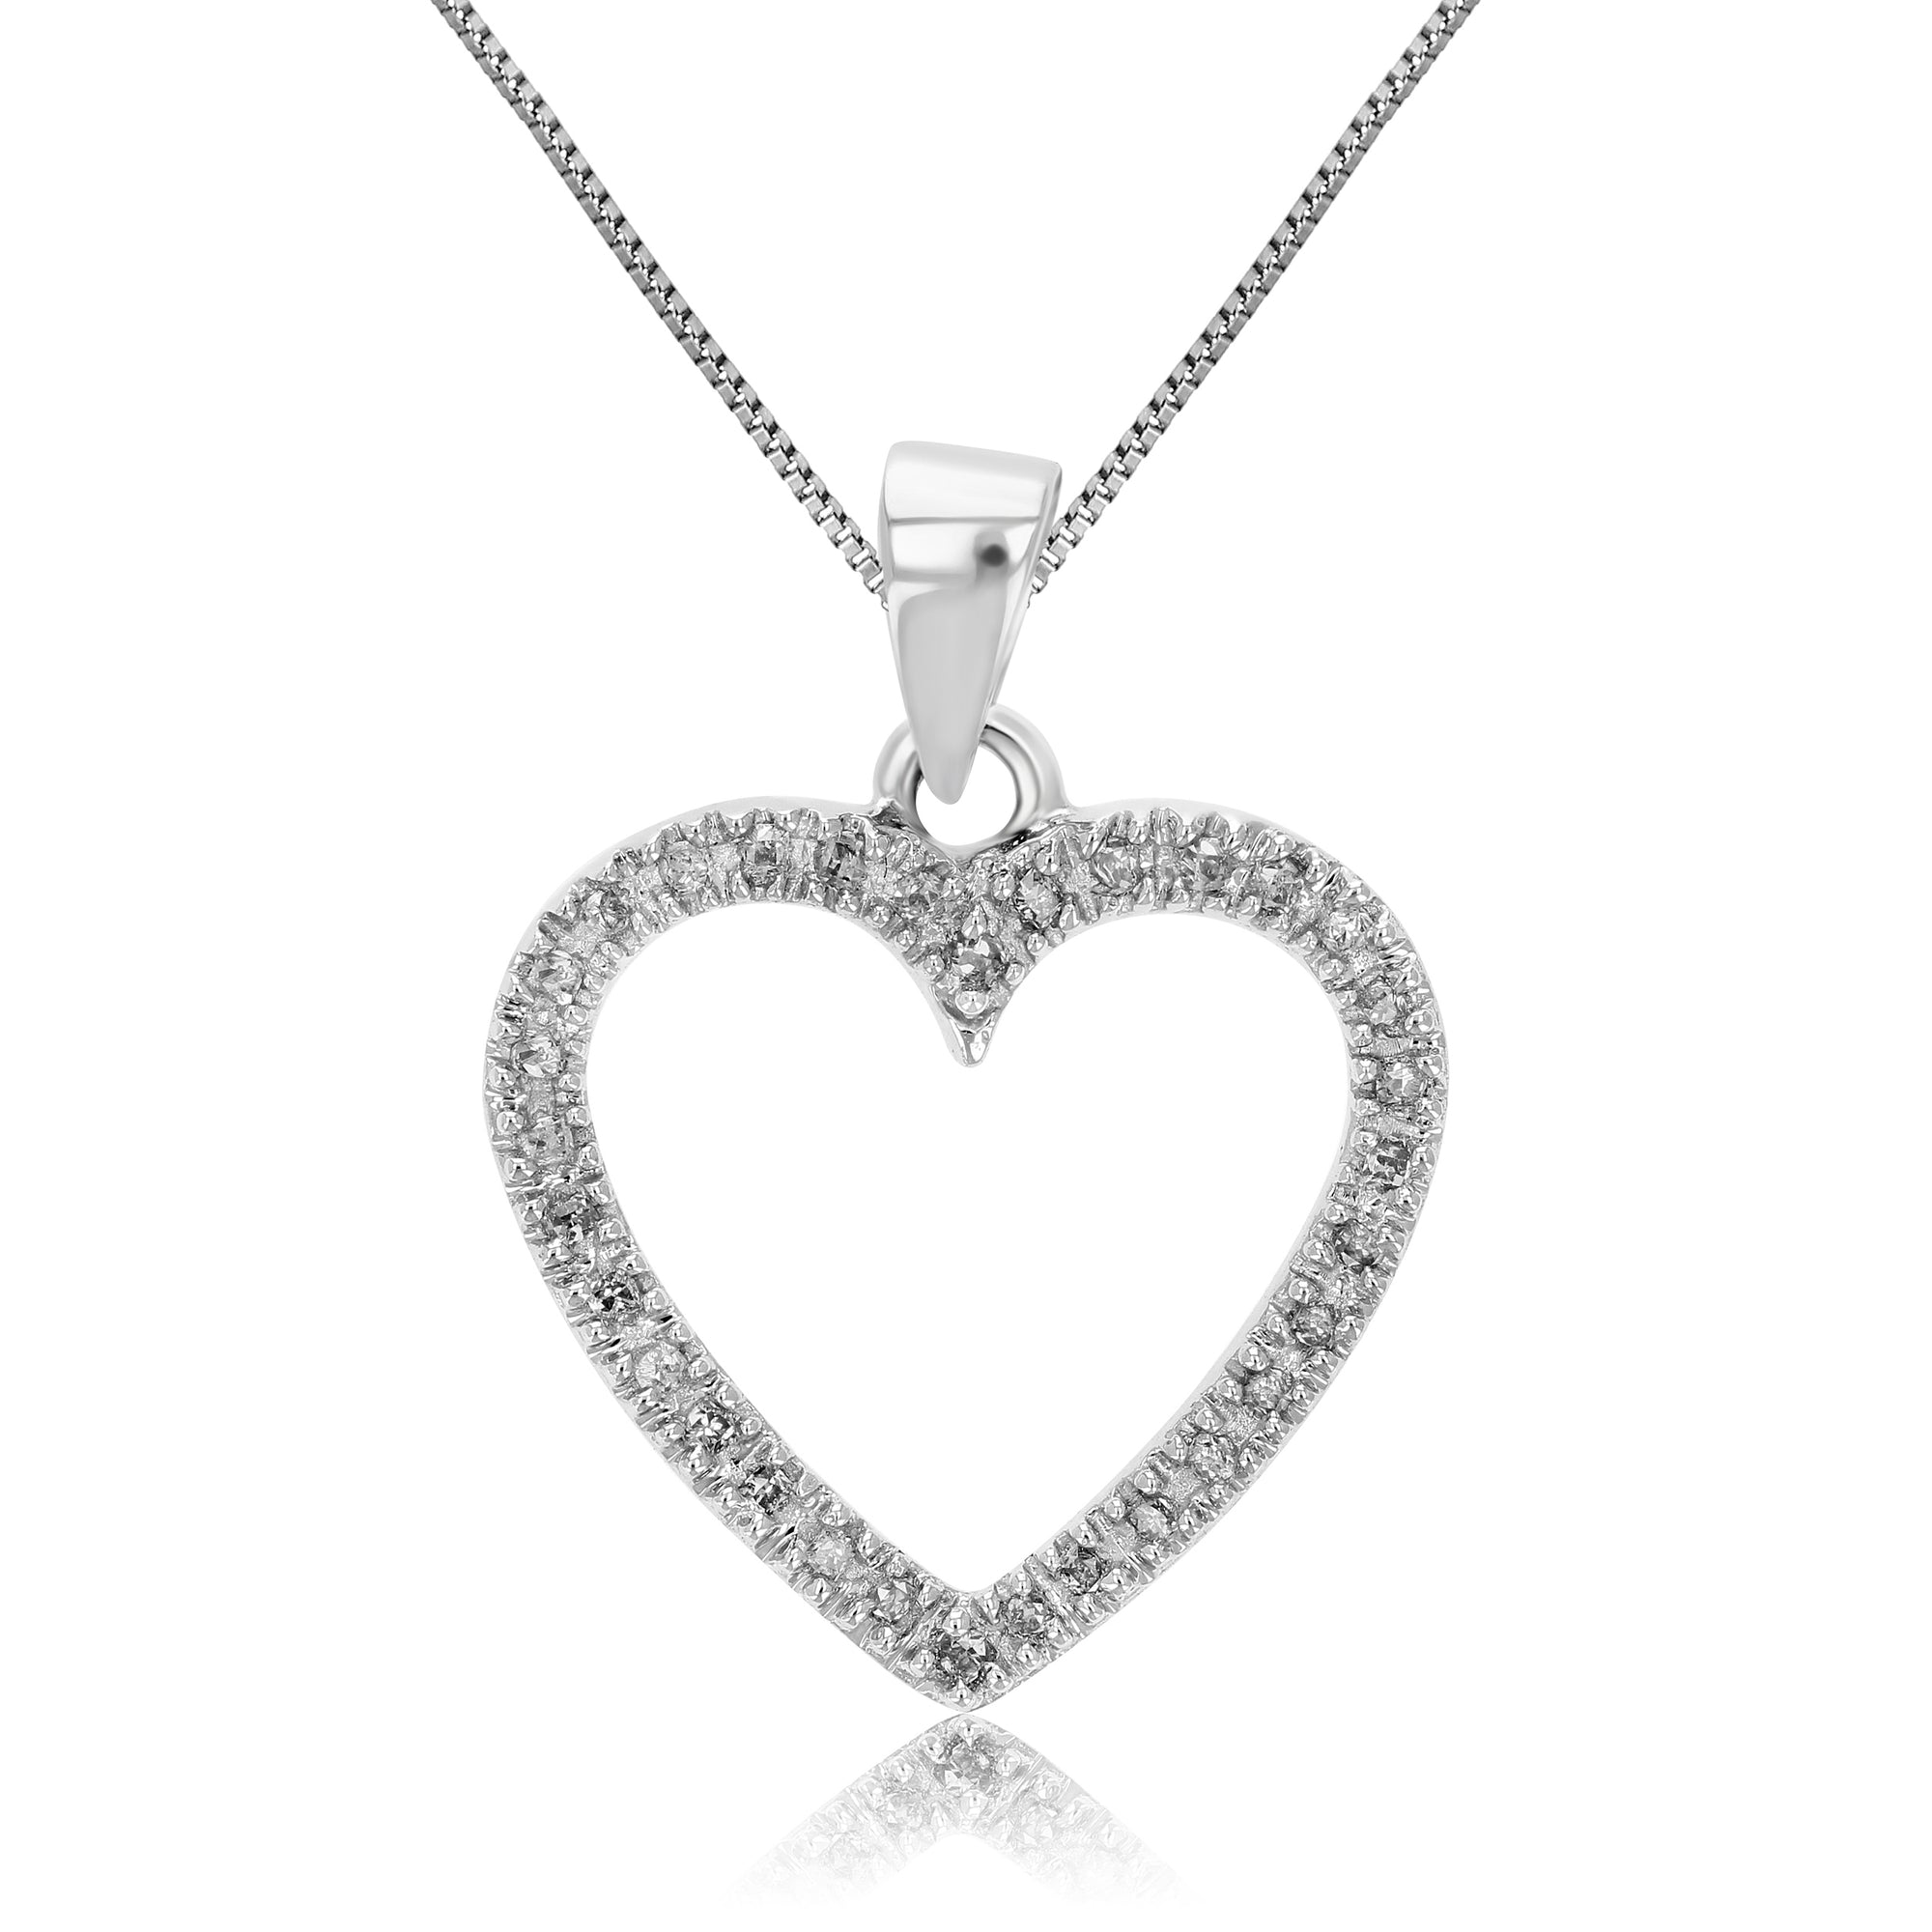 1/6 cttw Diamond Heart Pendant Necklace 14K White Gold with 18 Inch Chain